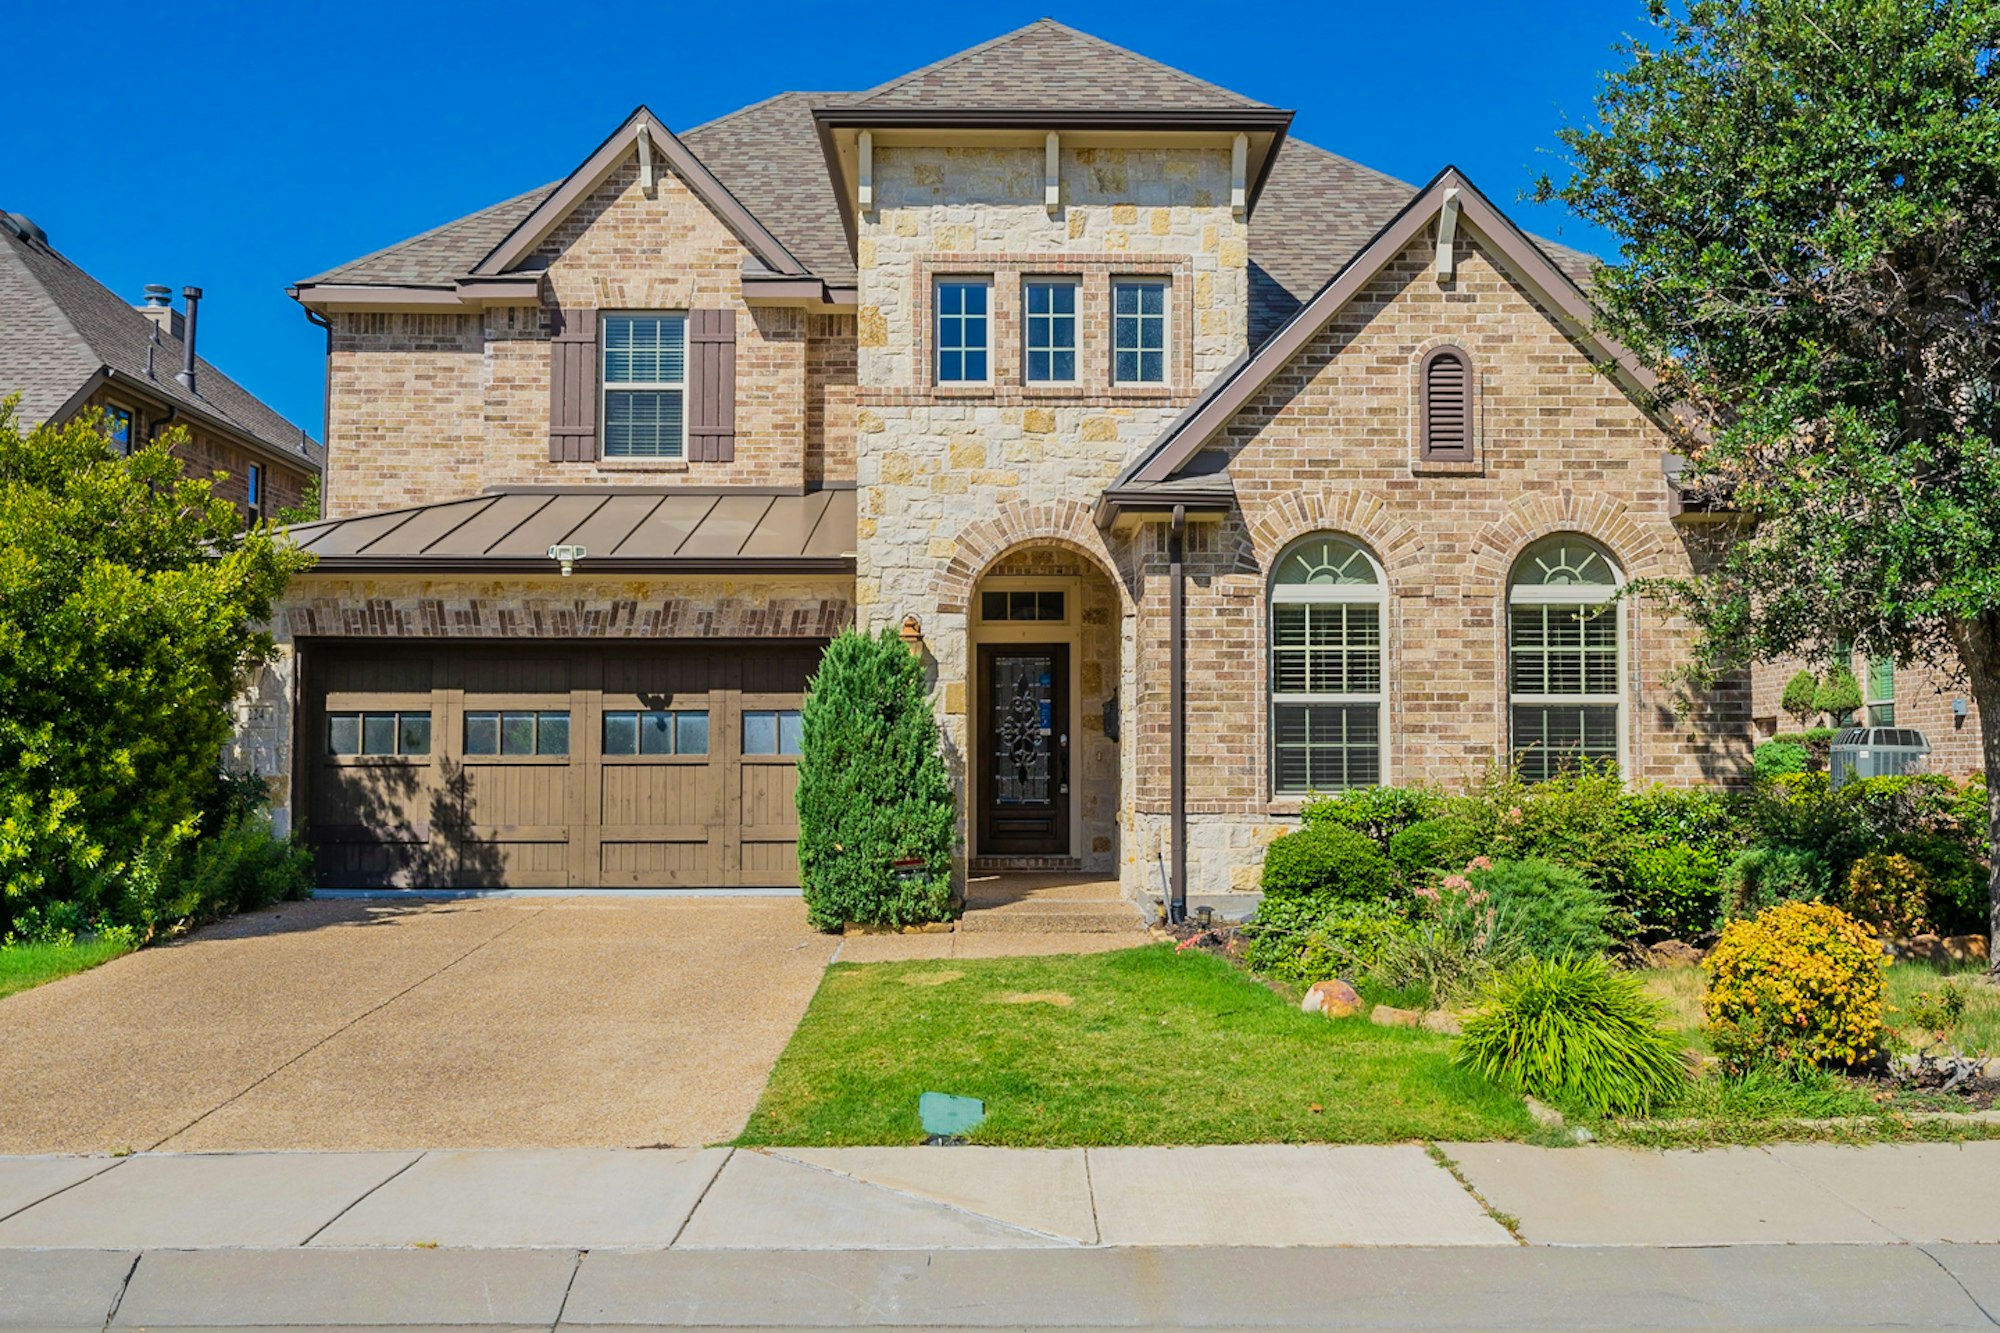 Photo 1 of 33 - 224 Anna Ave, Lewisville, TX 75056